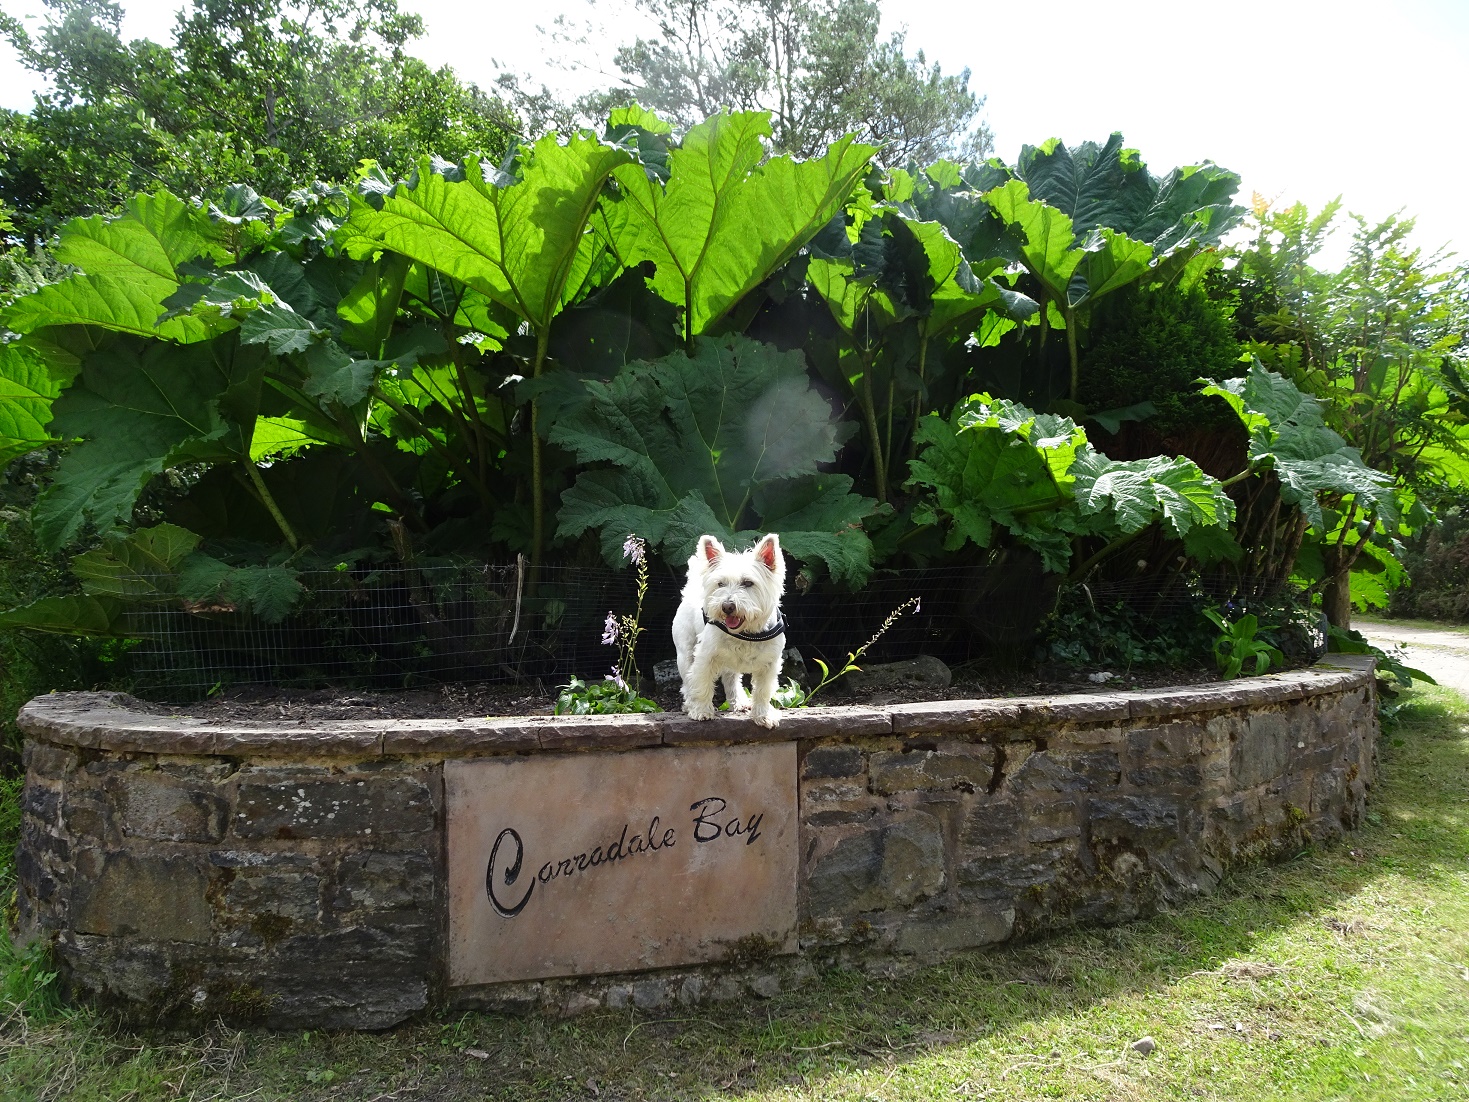 poppy the westie at entrance to Carradale Bay campsite